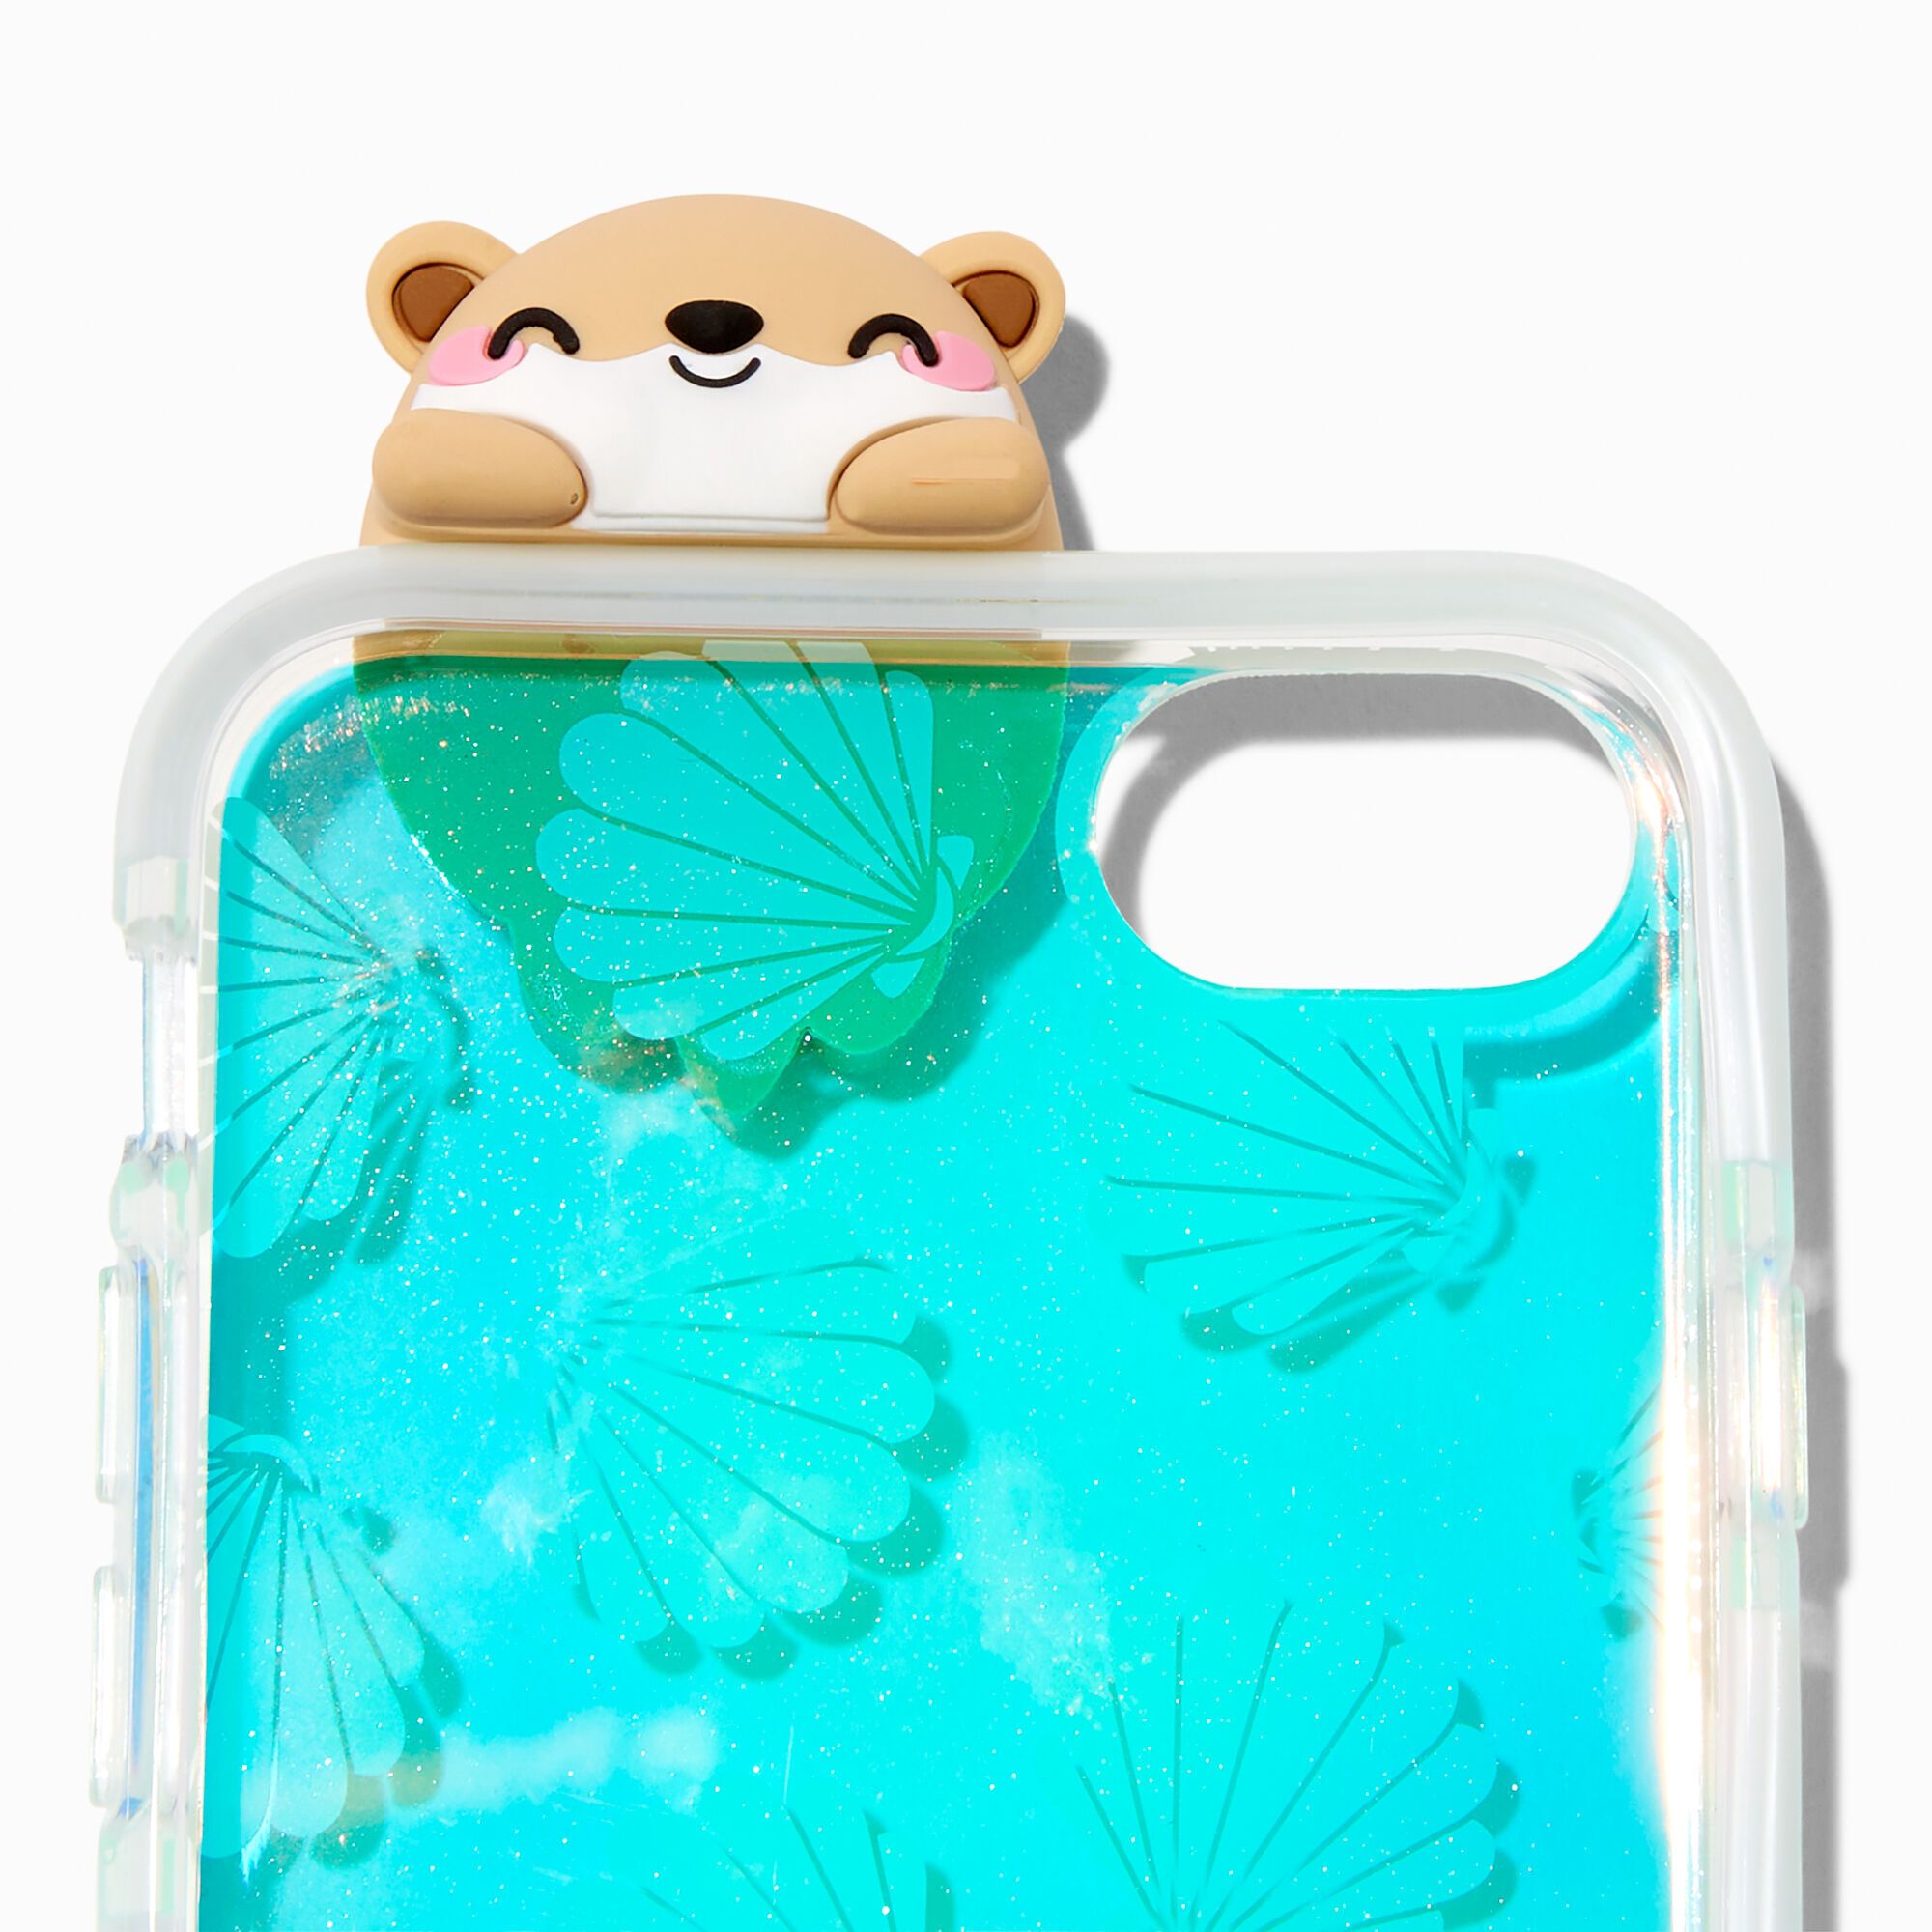 View Claires Sea Otter Peek A Boo Phone Case Fits Iphone 678se information